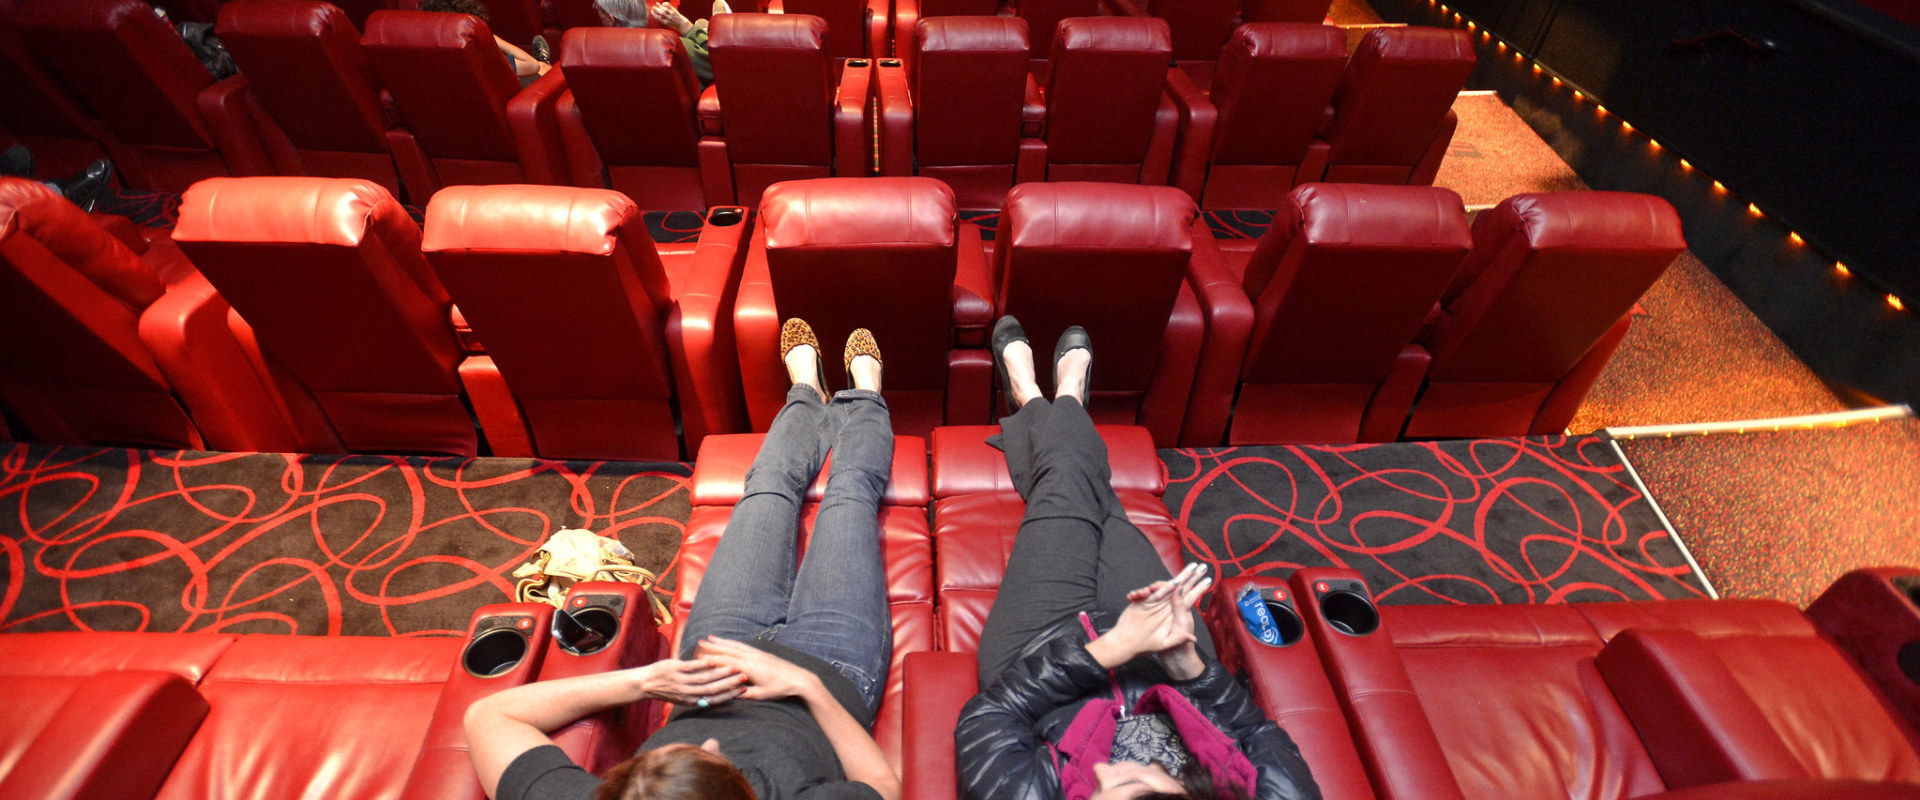 Movie Theater Seating: What You Need to Know